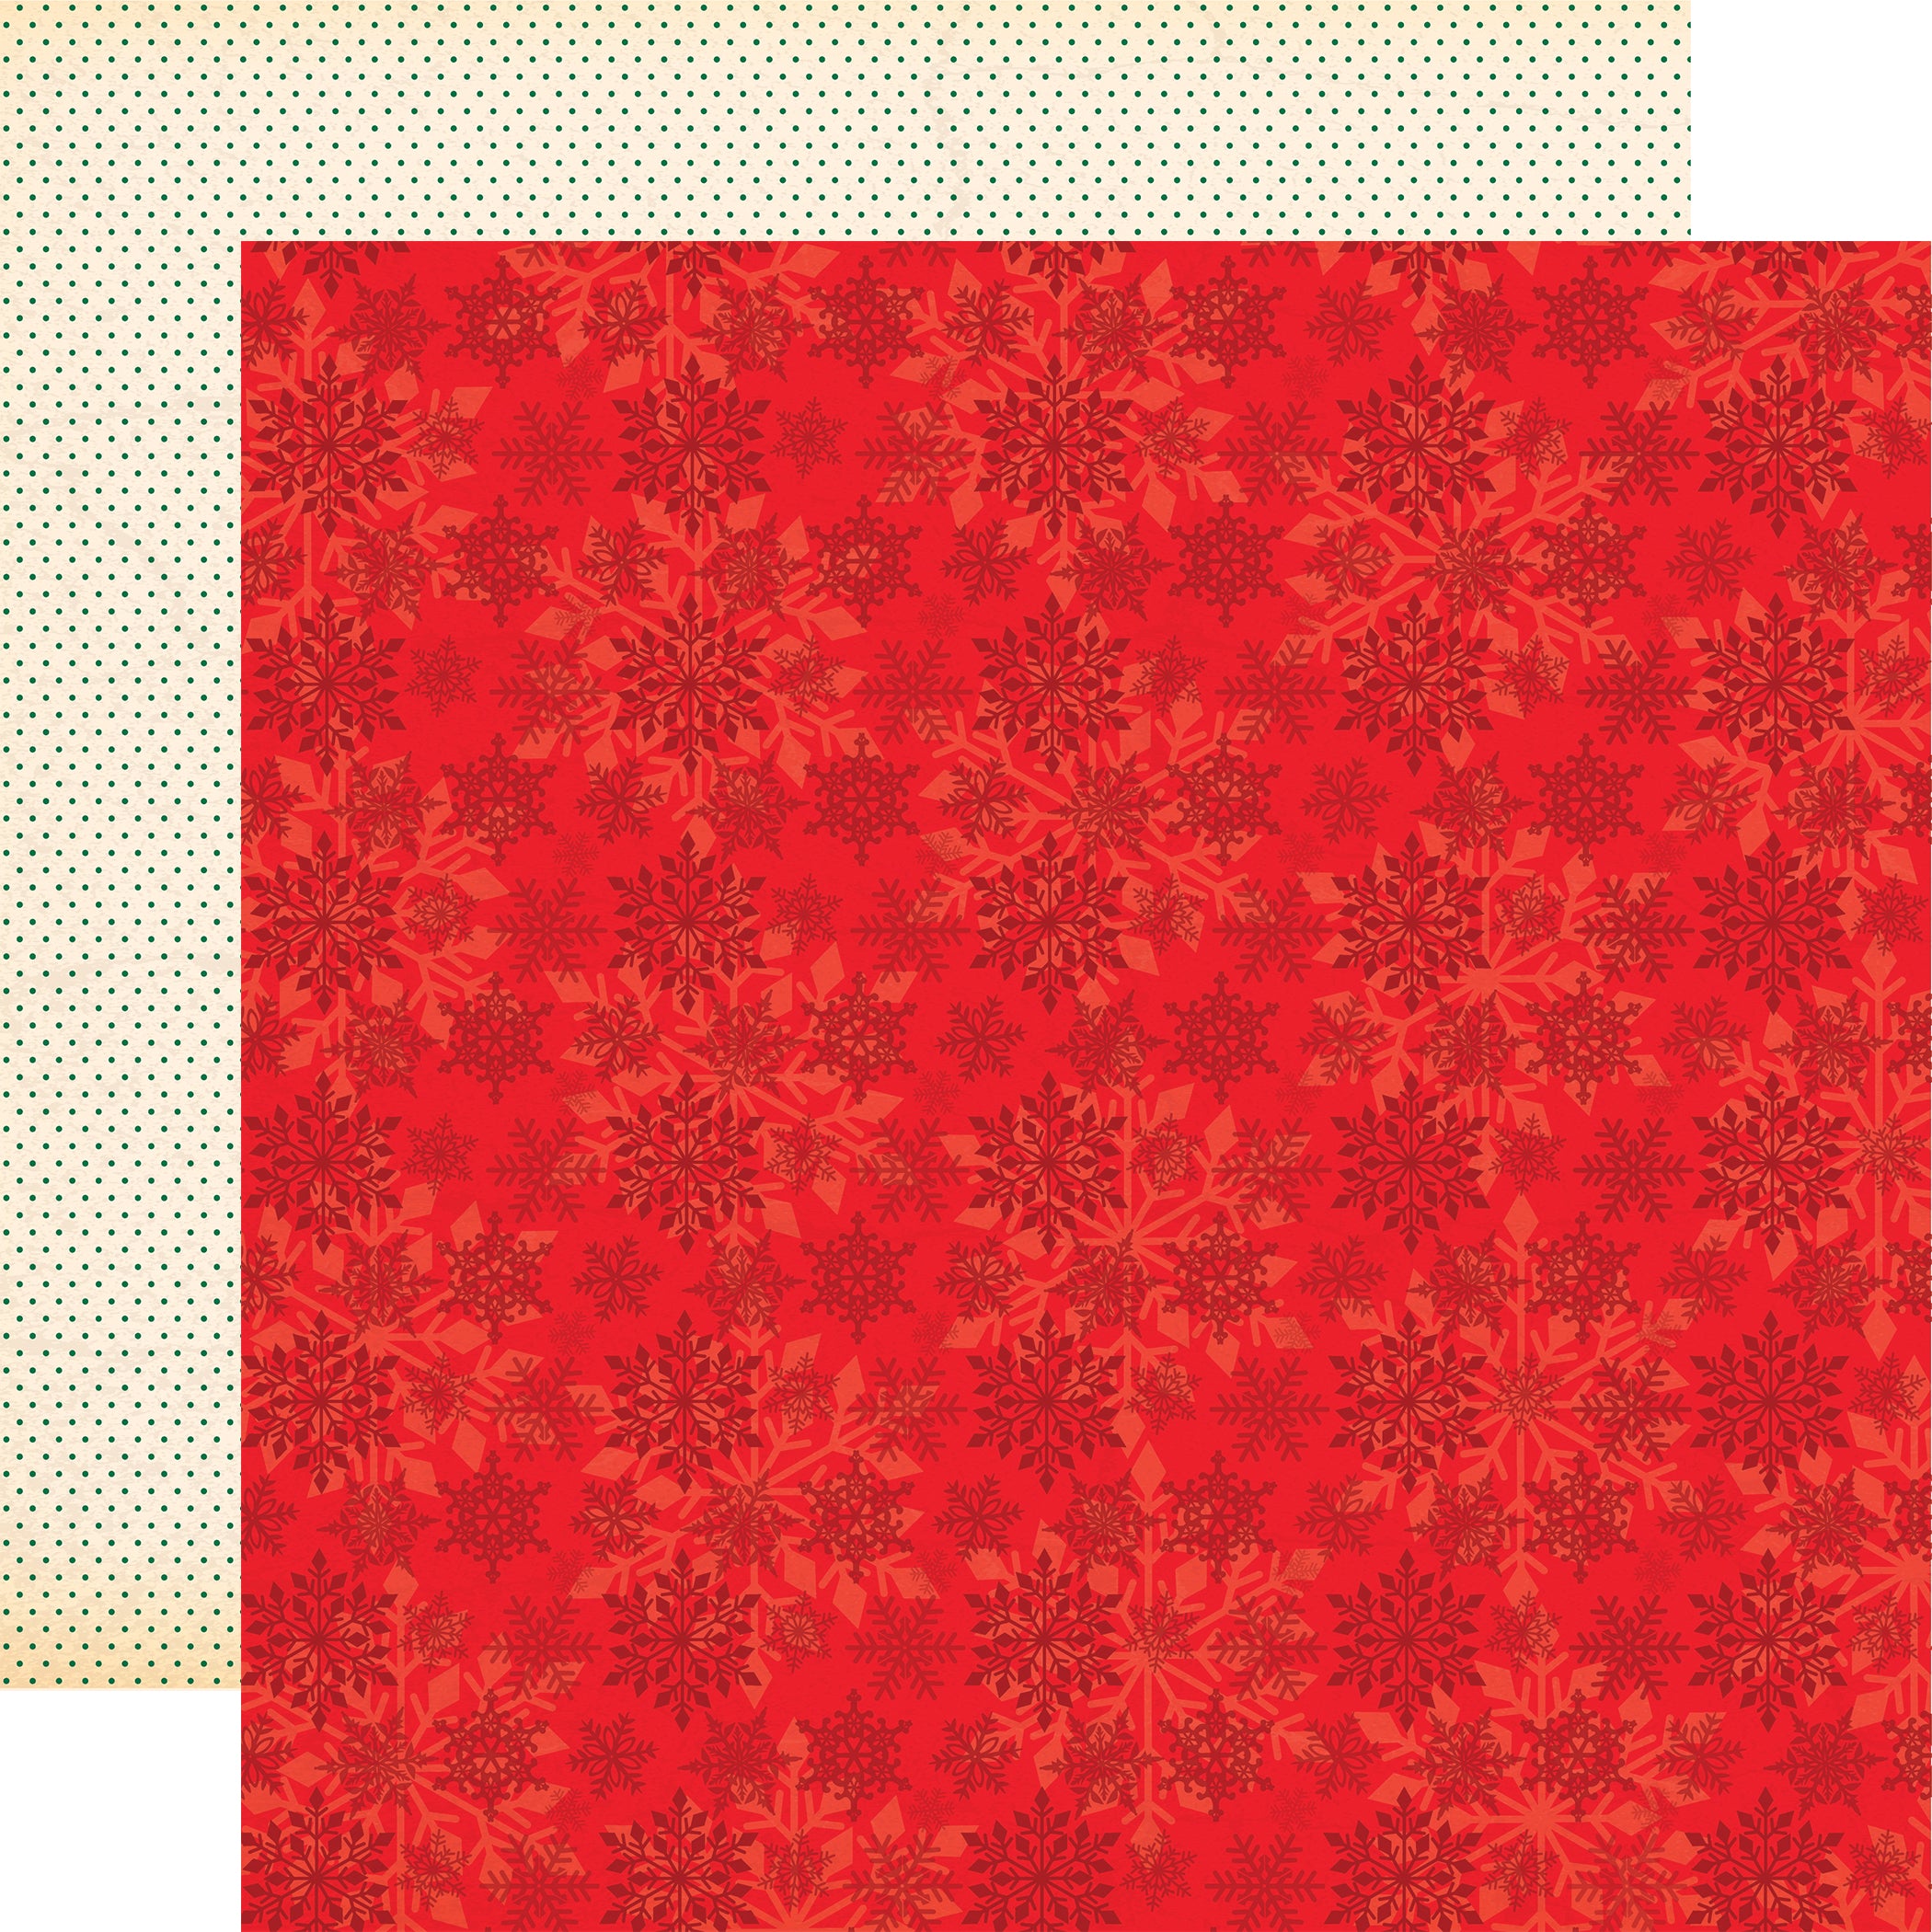 Season's Greetings Collection Seasonal Snowflakes  12 x 12 Double-Sided Scrapbook Paper by Carta Bella